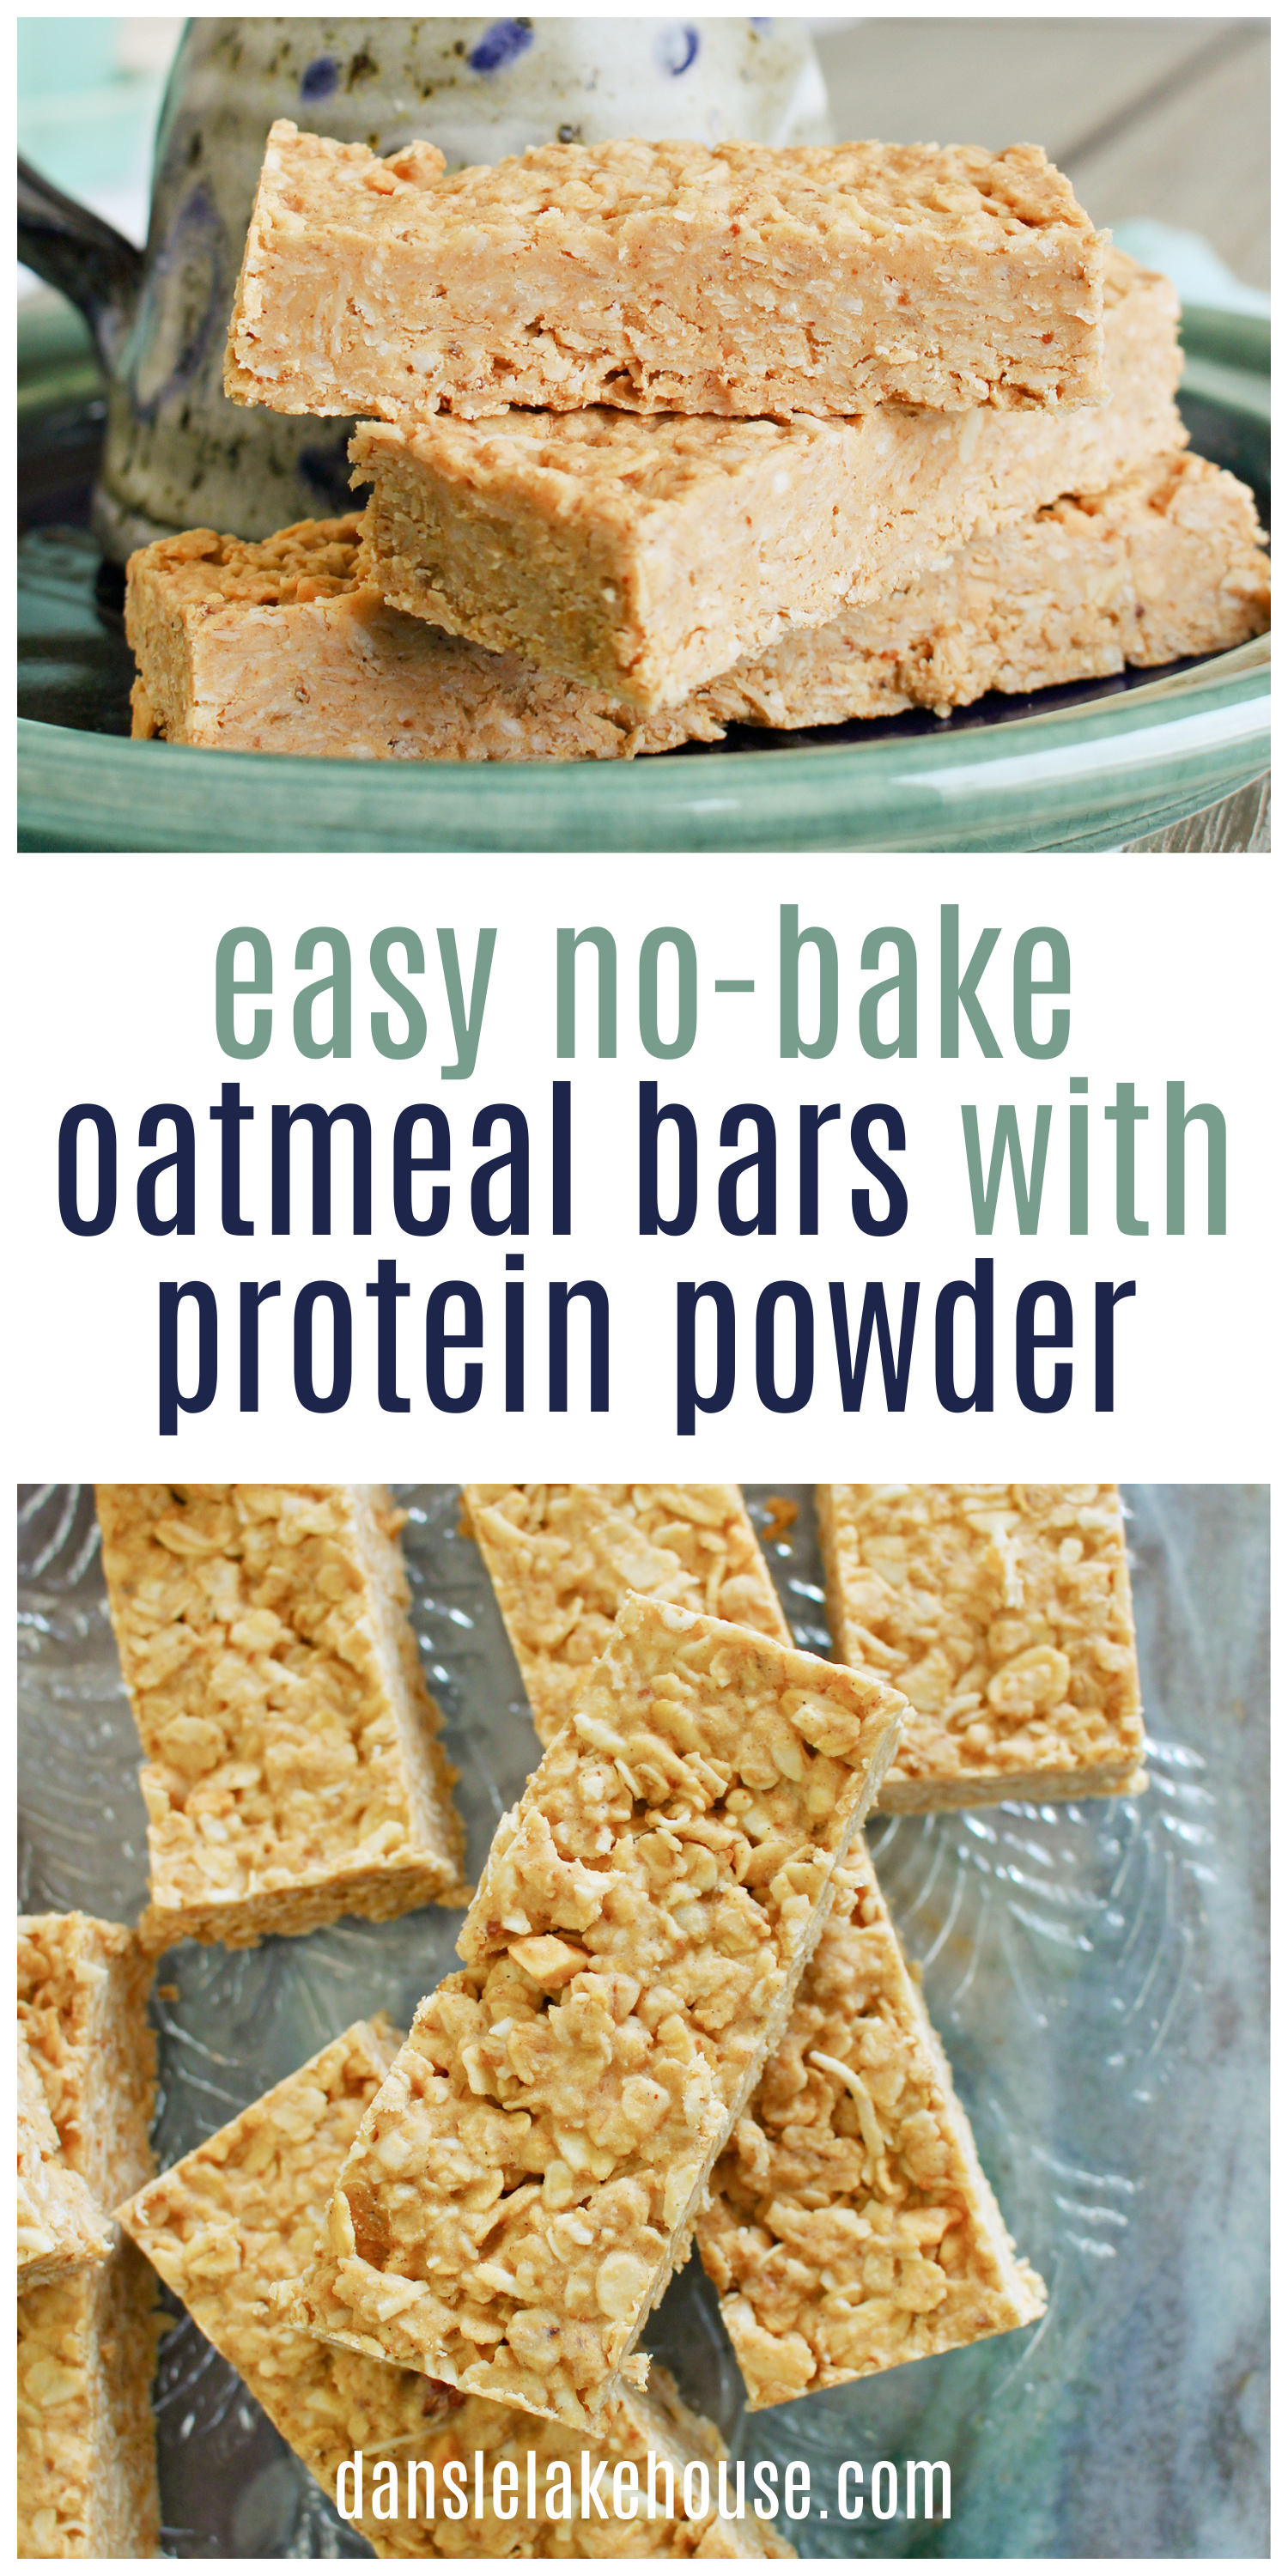 Easy No Bake Peanut Butter Oatmeal Protein Bars with Protein Powder